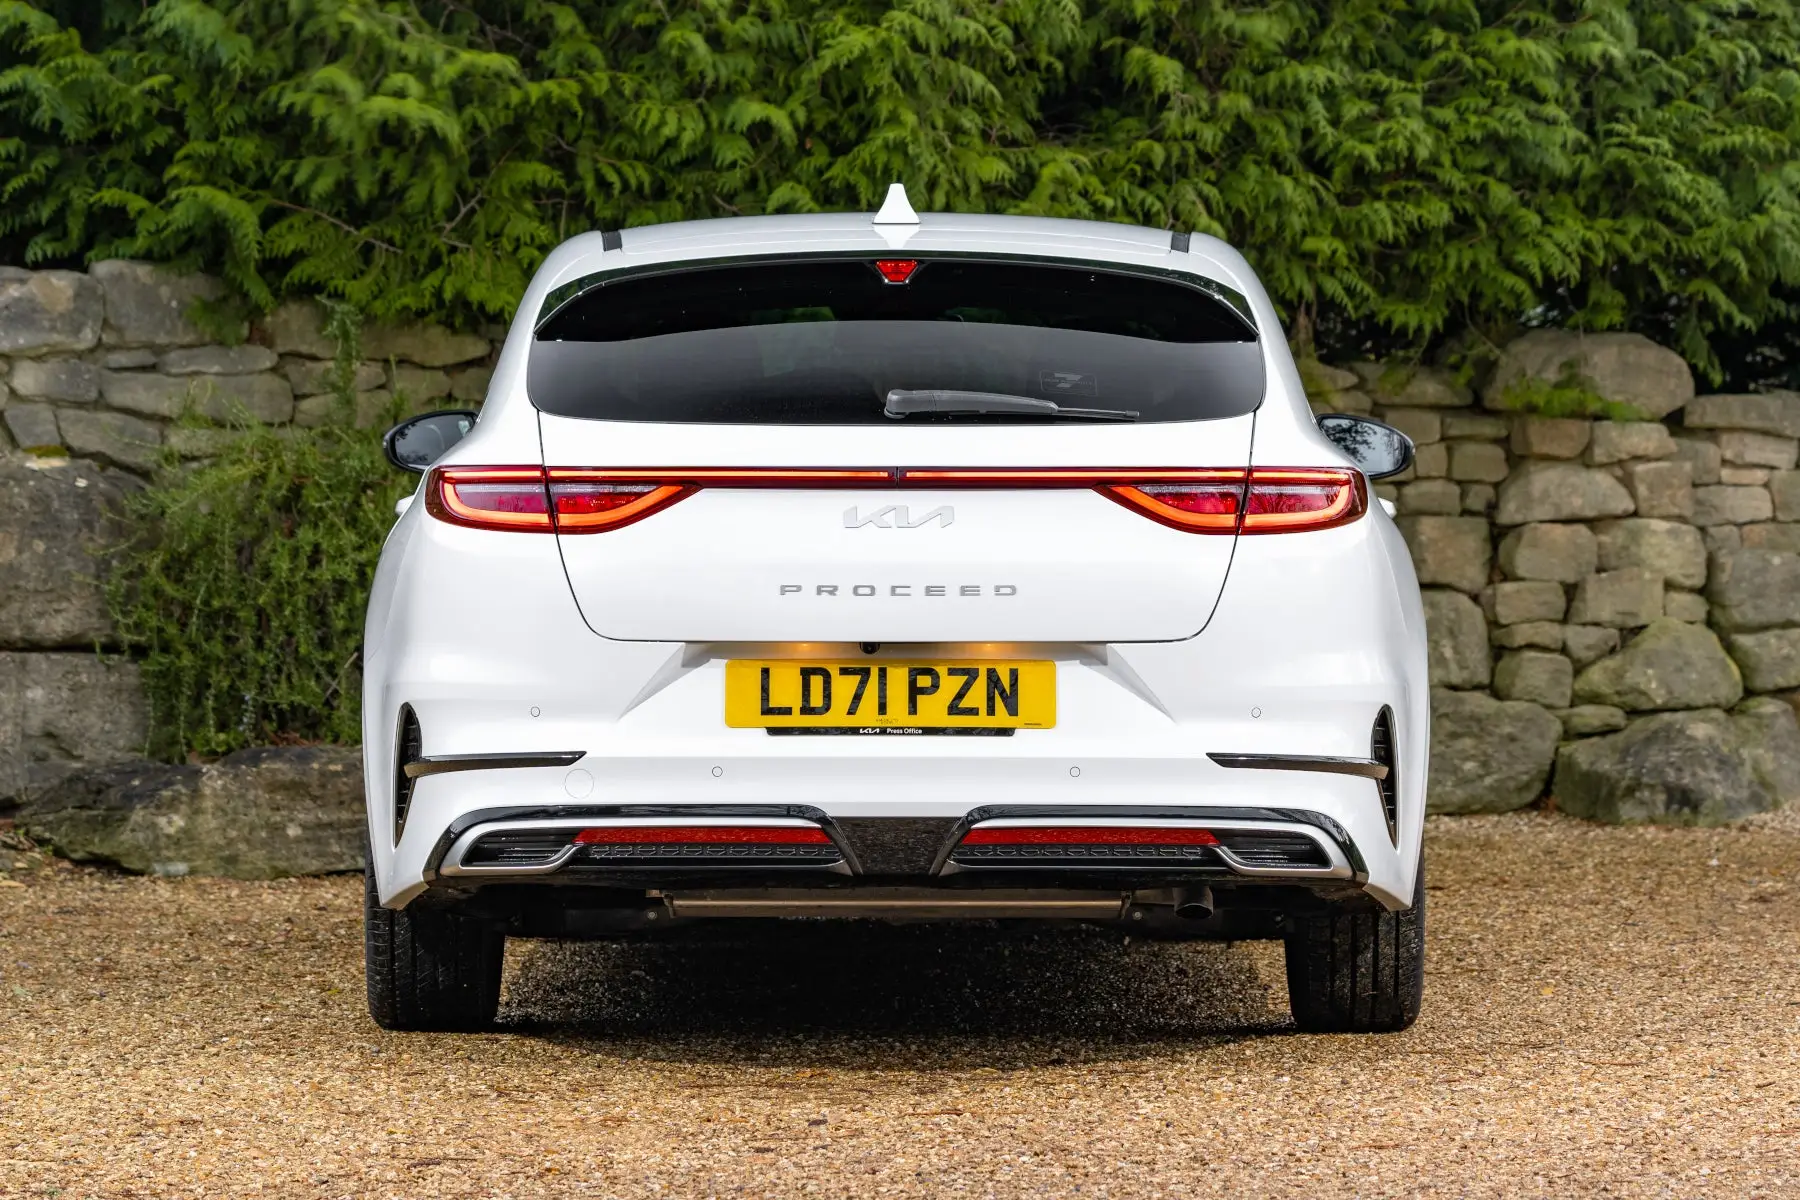 Kia Proceed GT review - value and fun from Kia's appealing hot hatch